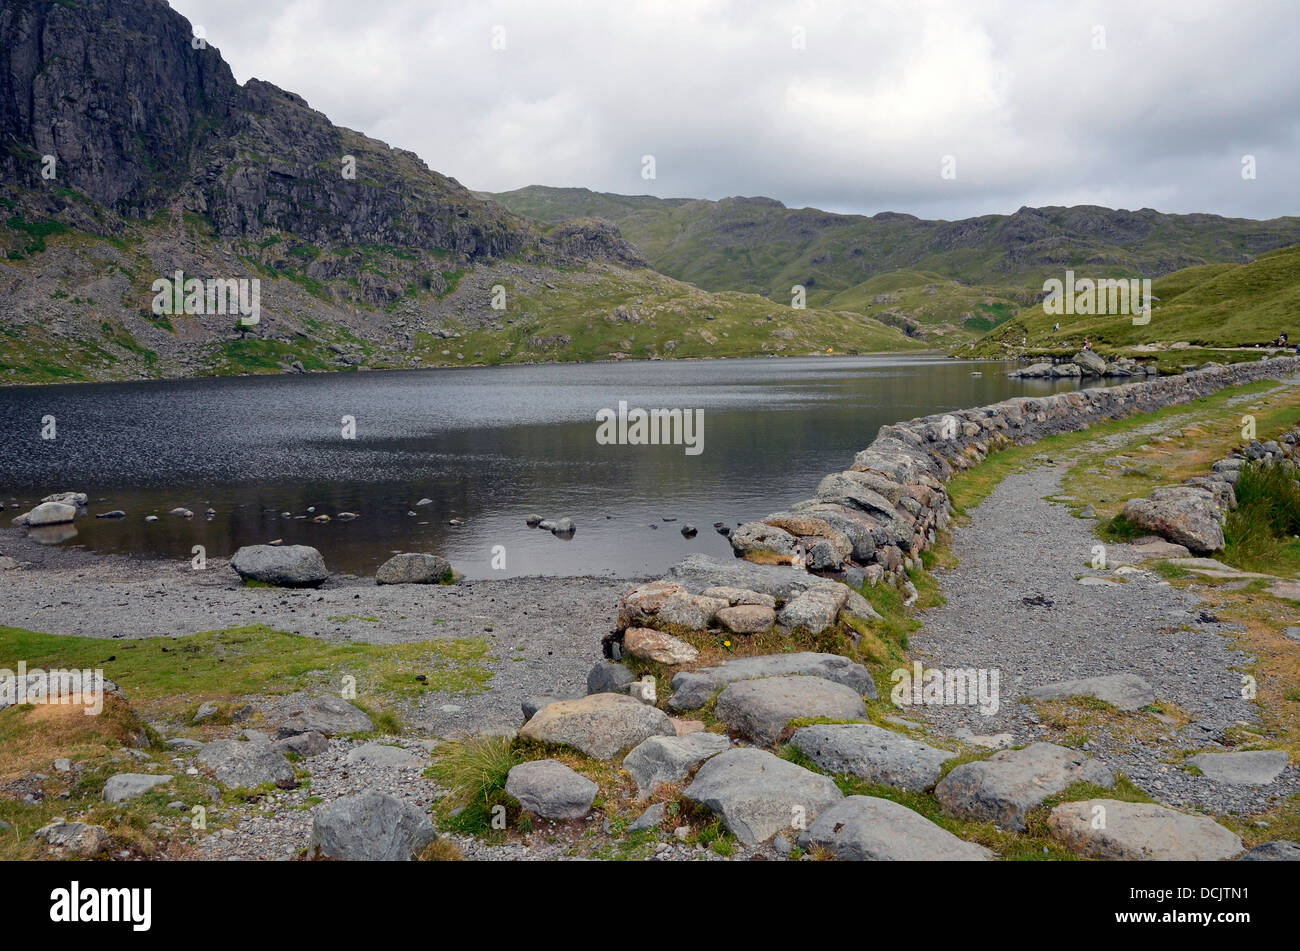 Dam at mouth of Stickle Tarn, popular tourist spot above the Langdale valley in the Lake District National Park. Stock Photo